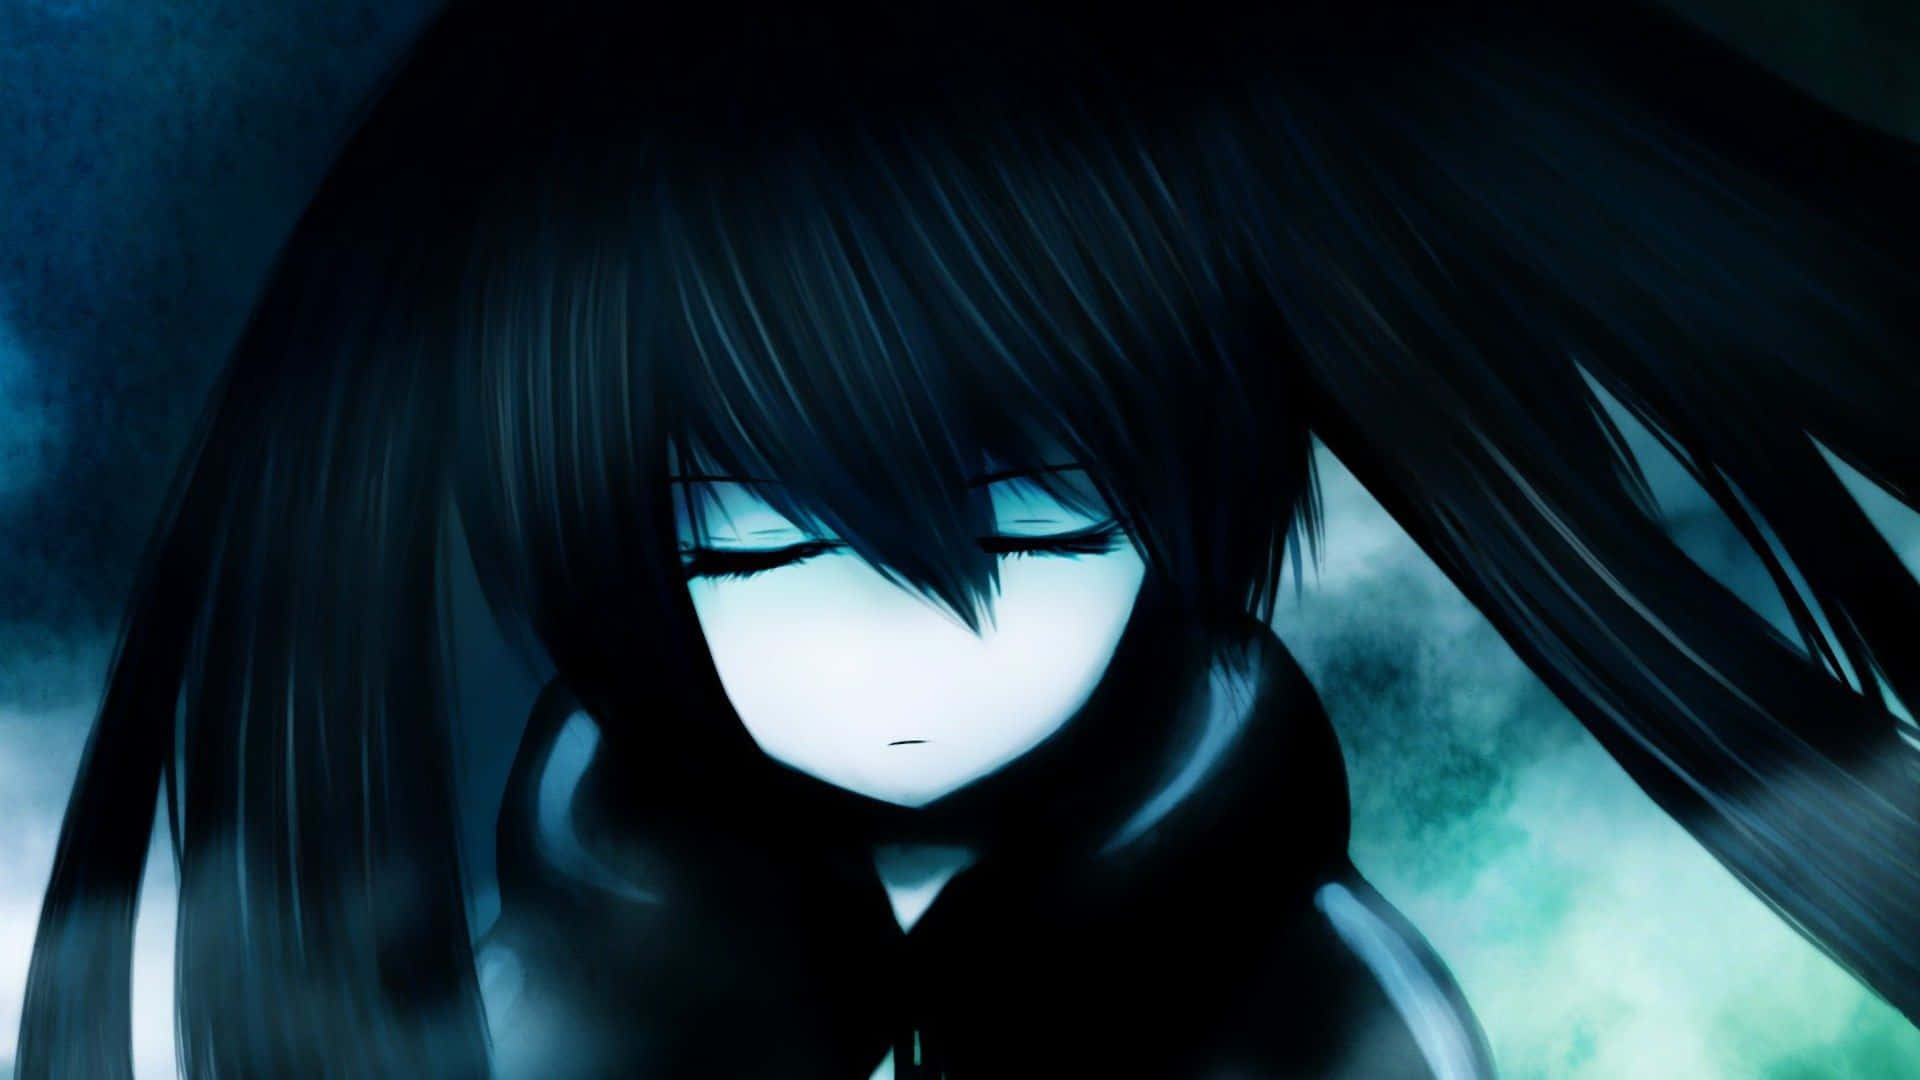 Sad crying anime, shedding tears in loneliness Wallpaper